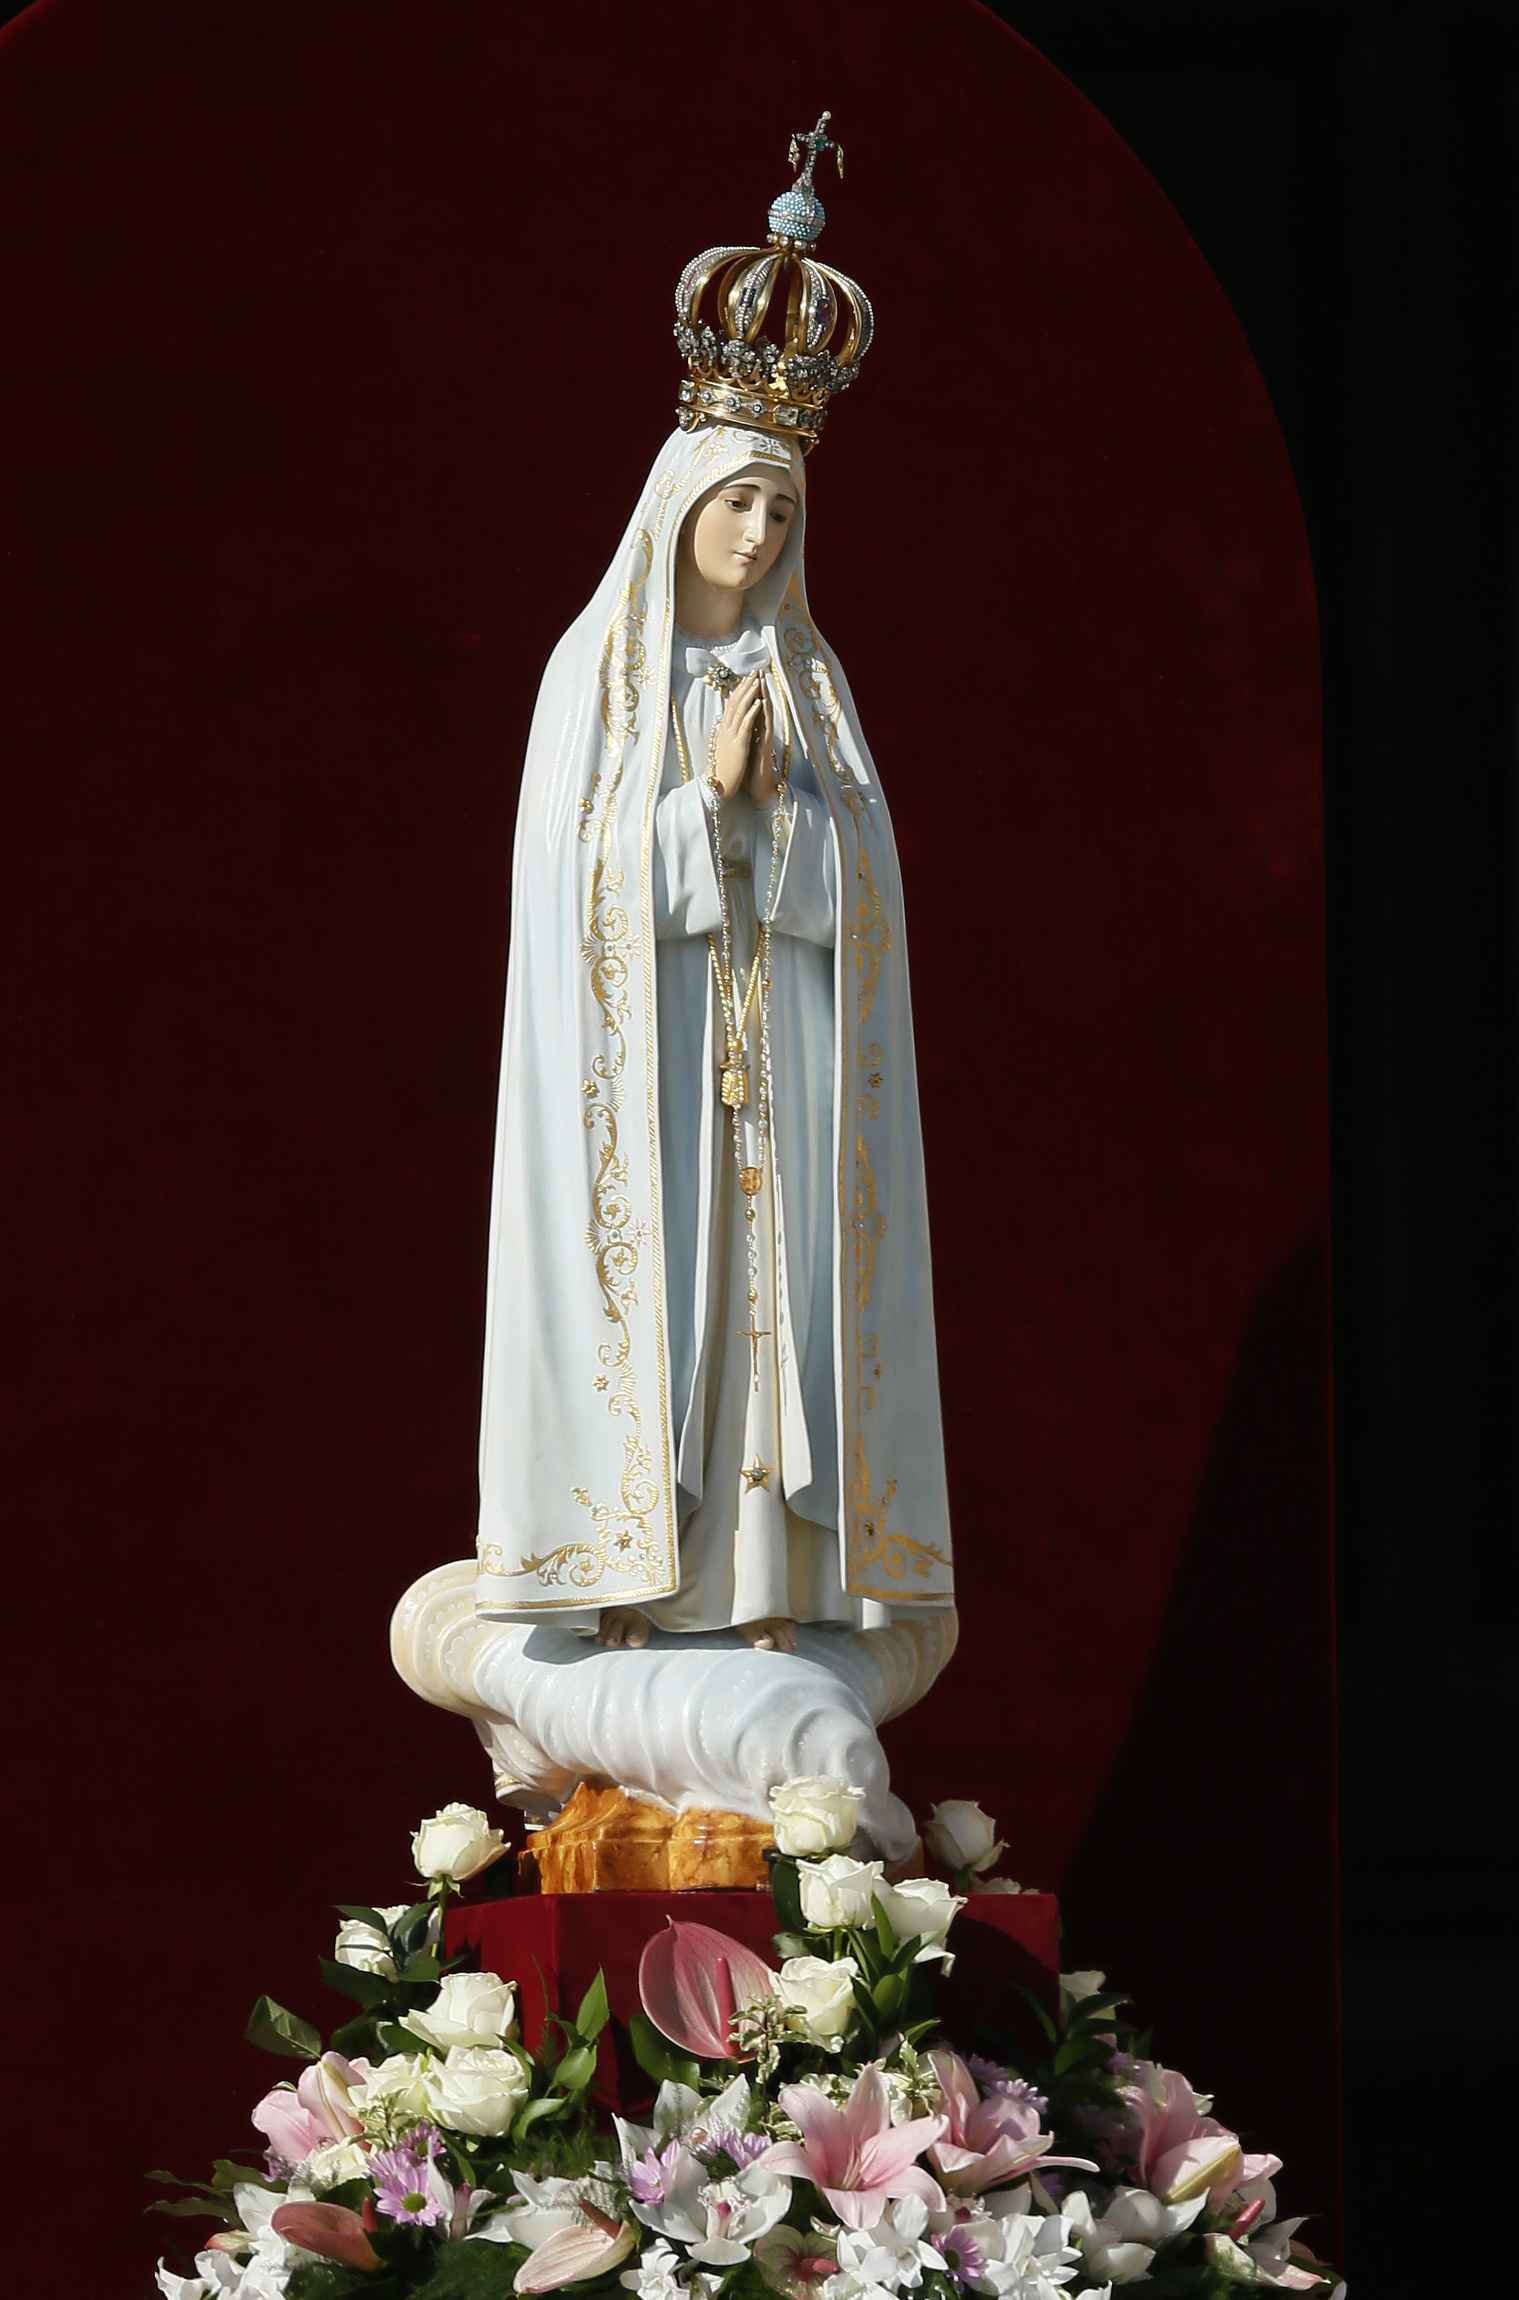 Our Lady of Fatima 2